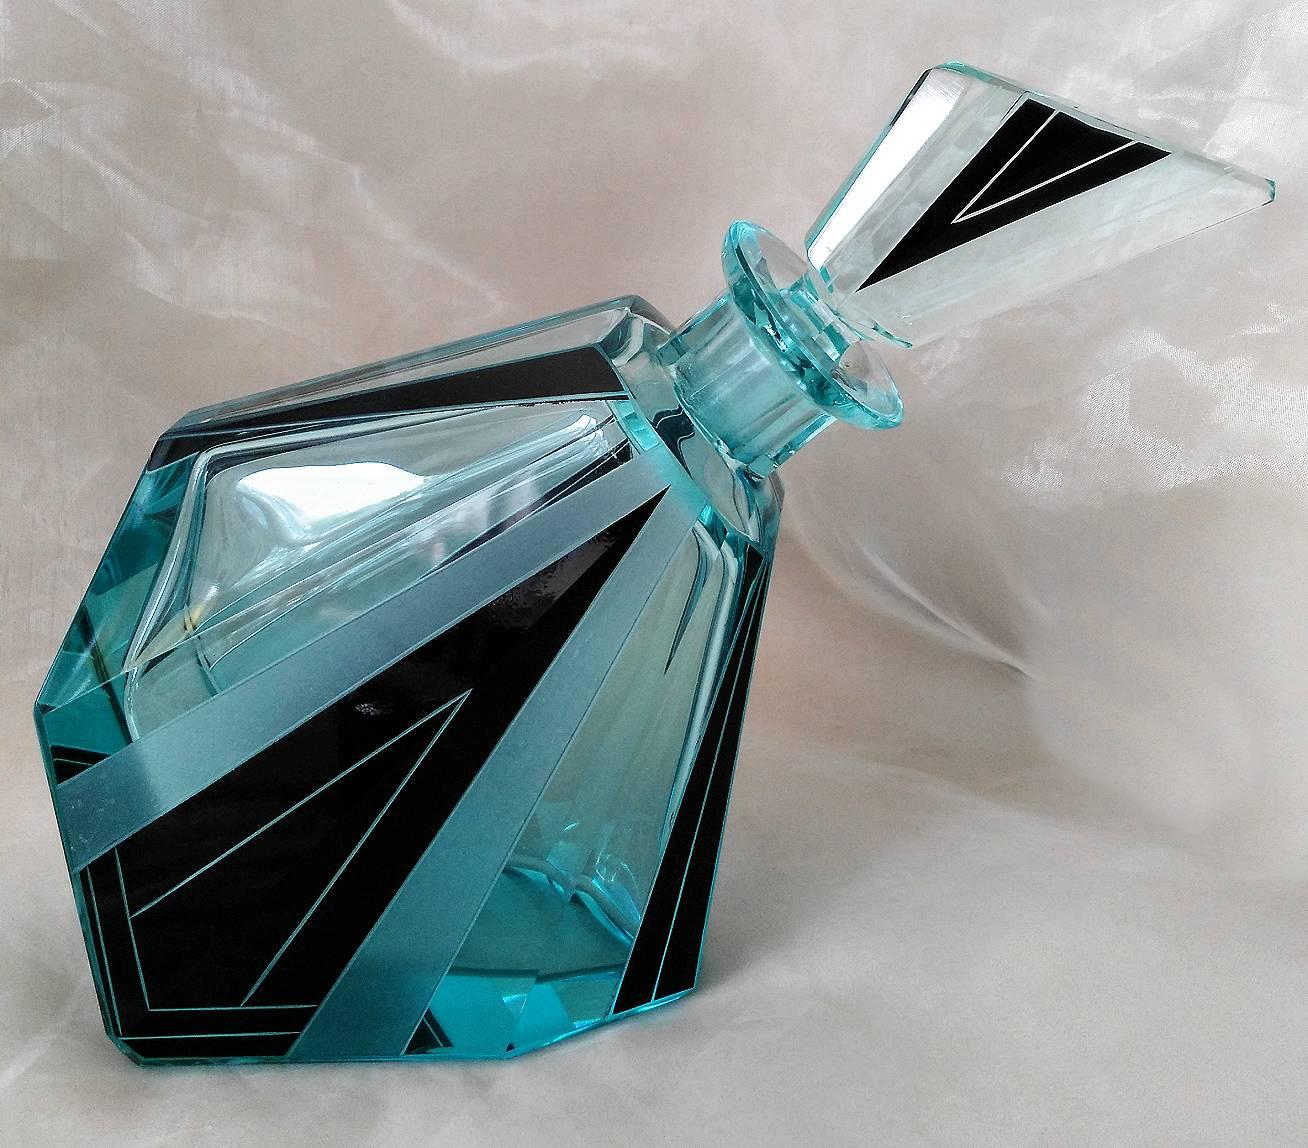 Wonderfully quirky and stylish Glass decanter set by Karl Palda. Geometric enamelling decorate the attractive turquoise crystal, stunning shape and cut, small shot glasses. Comprises decanter and stopper with six glasses. Condition is excellent no